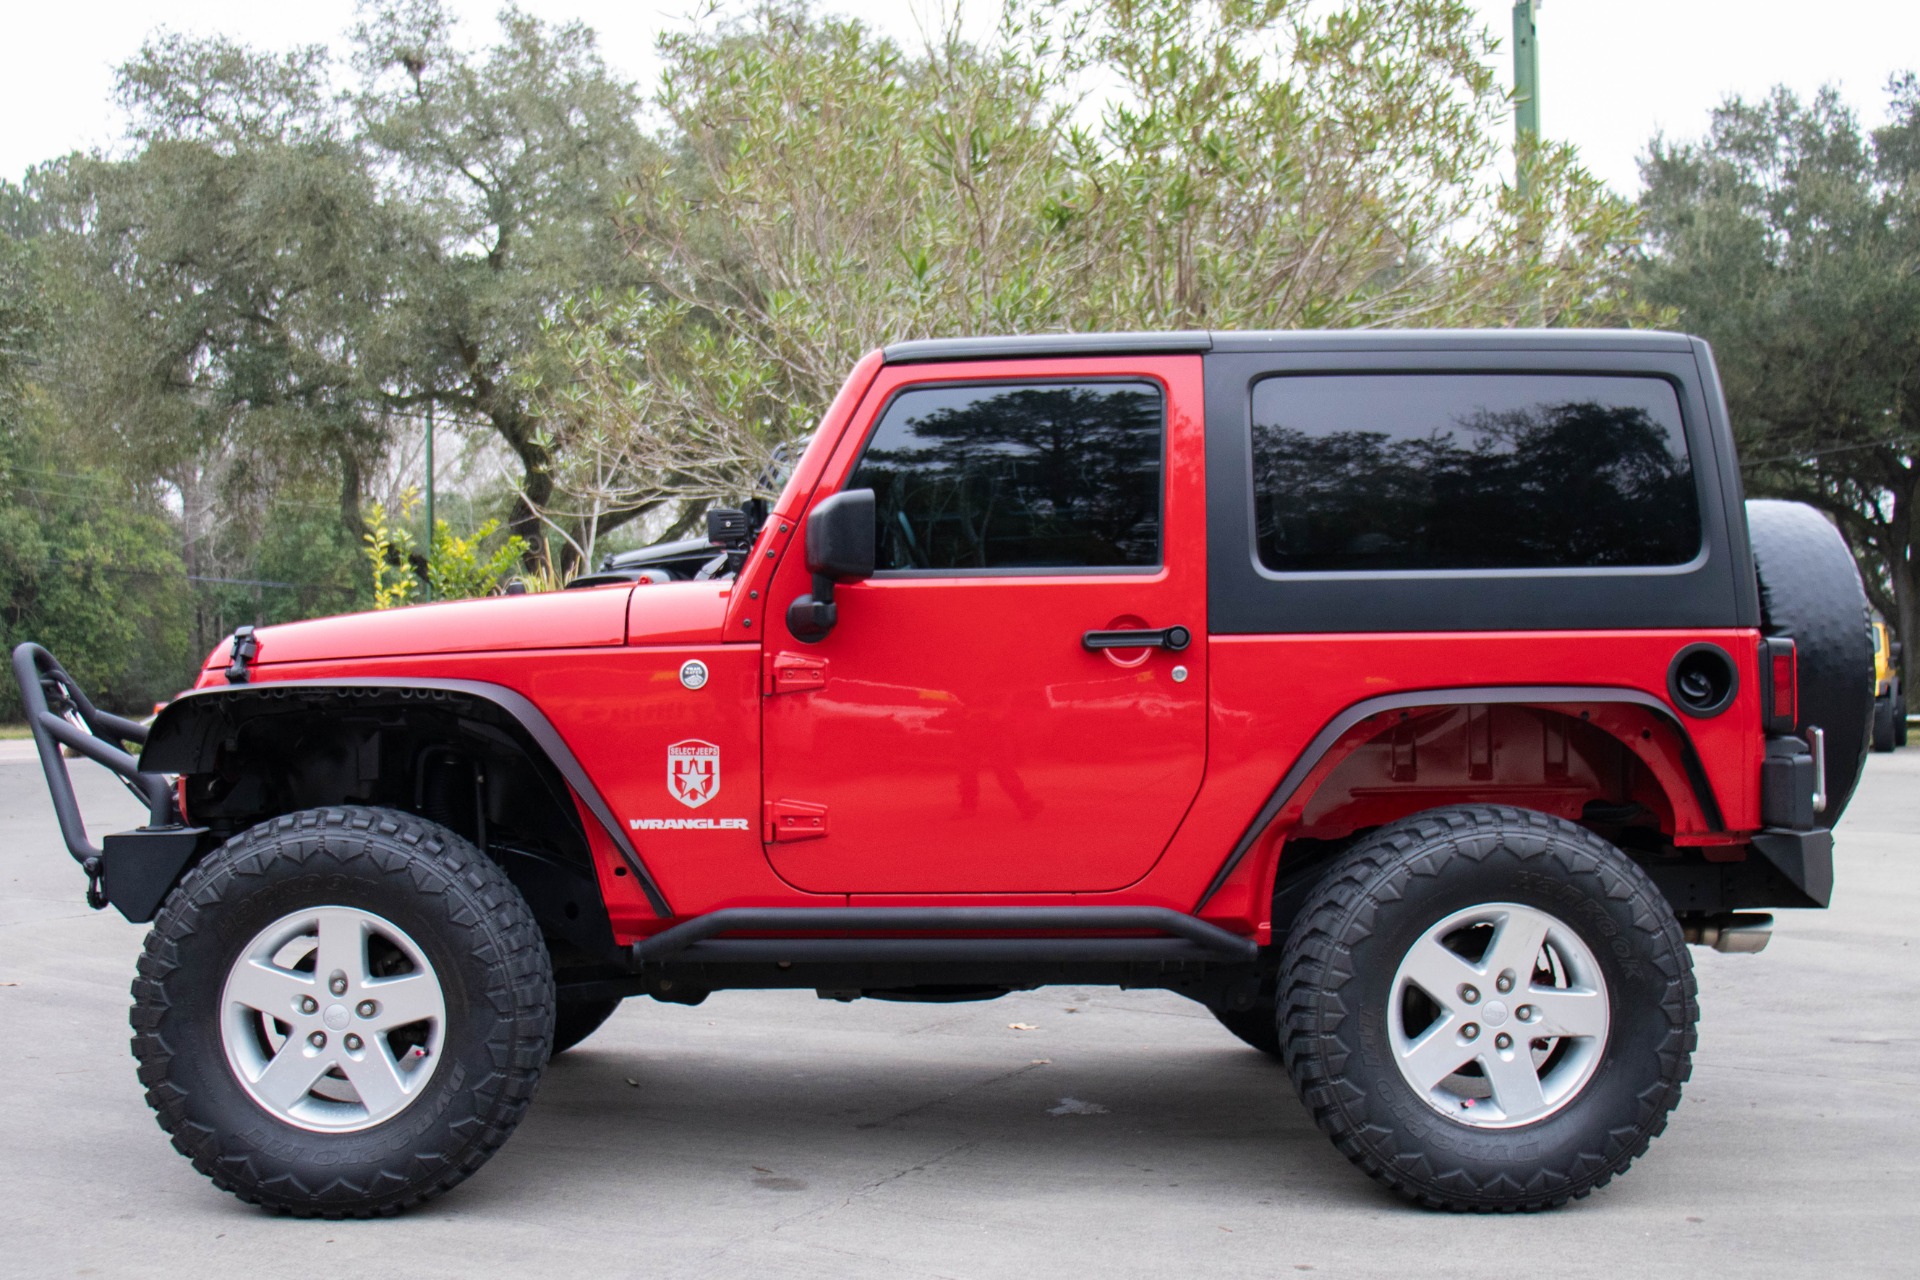 Used 2012 Jeep Wrangler Sport For Sale ($22,995) | Select ...